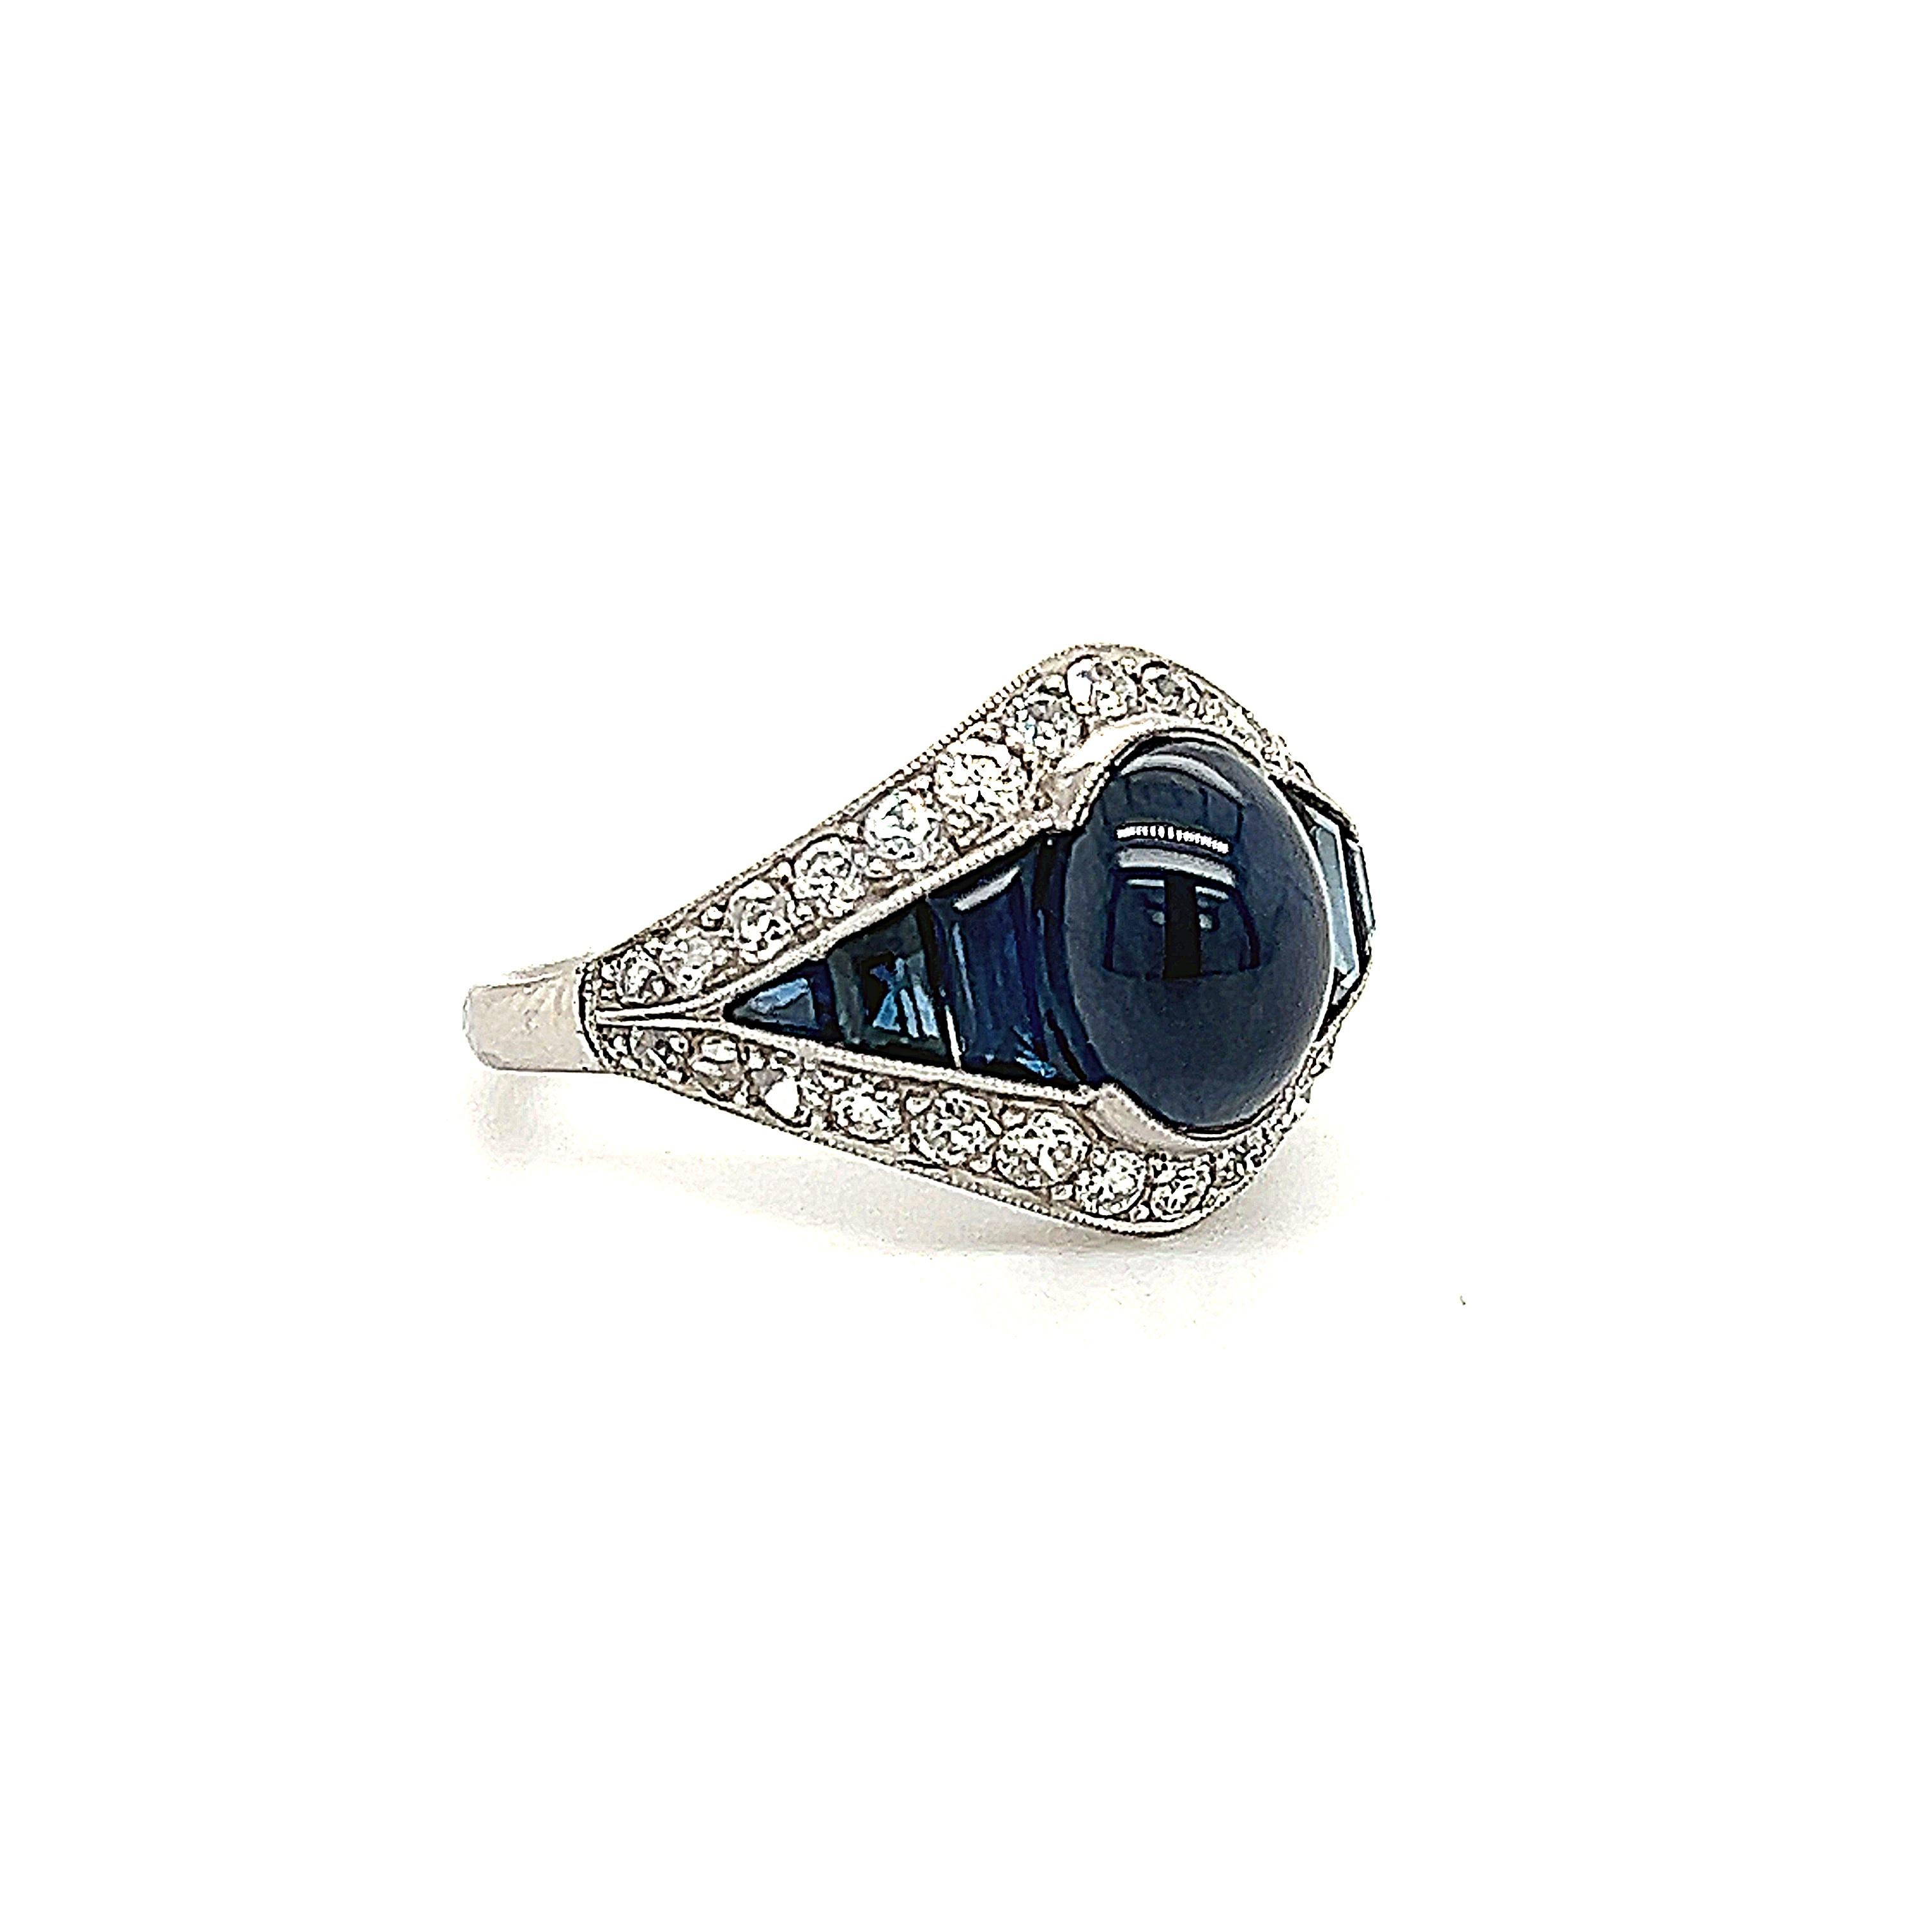 Wonderful creation crafted in 18k white gold. Styled after the art deco time period this ring is truly breathtaking and a real show stopper. The ring shows a unique design as diamond and sapphire gemstones are set perfectly making this ring a true